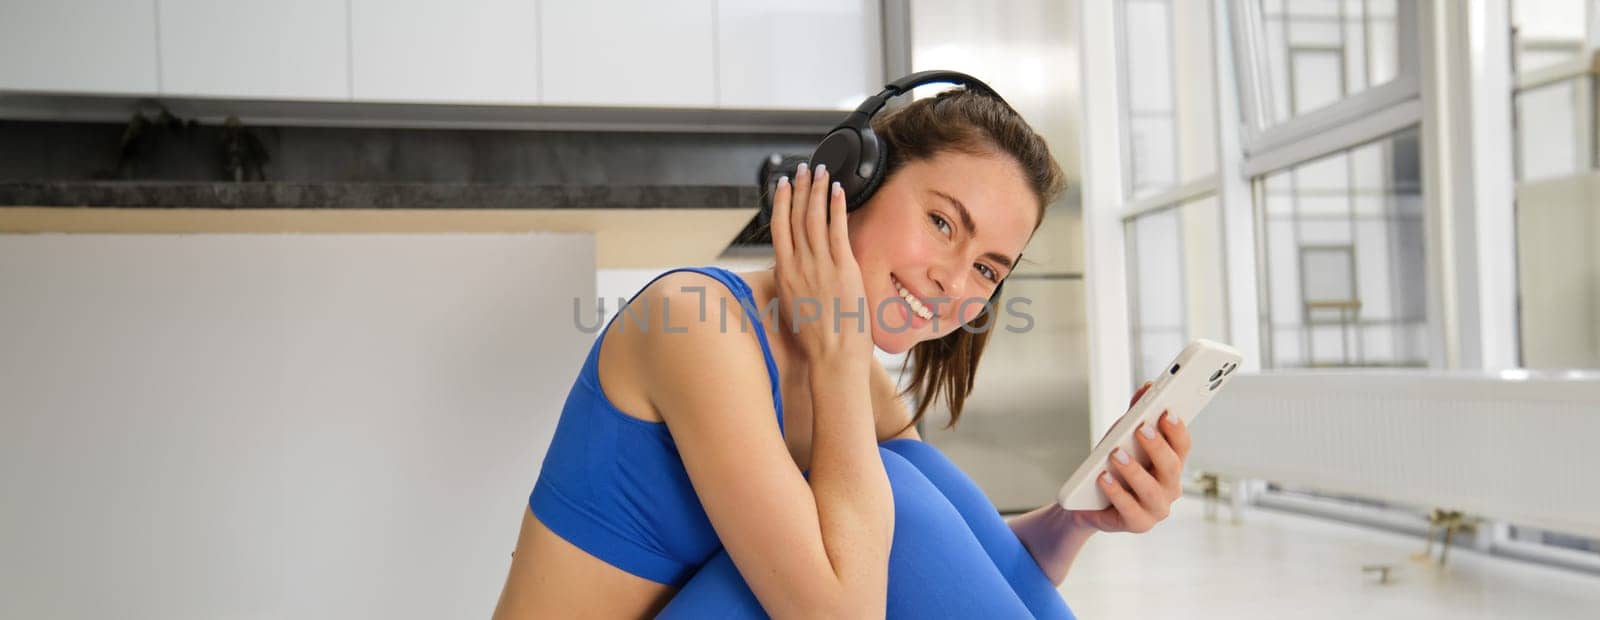 Fitness and wellbeing. Portrait of young woman doing fitness exercises, workout from home, wearing headphones and using smartphone, exercising indoors.